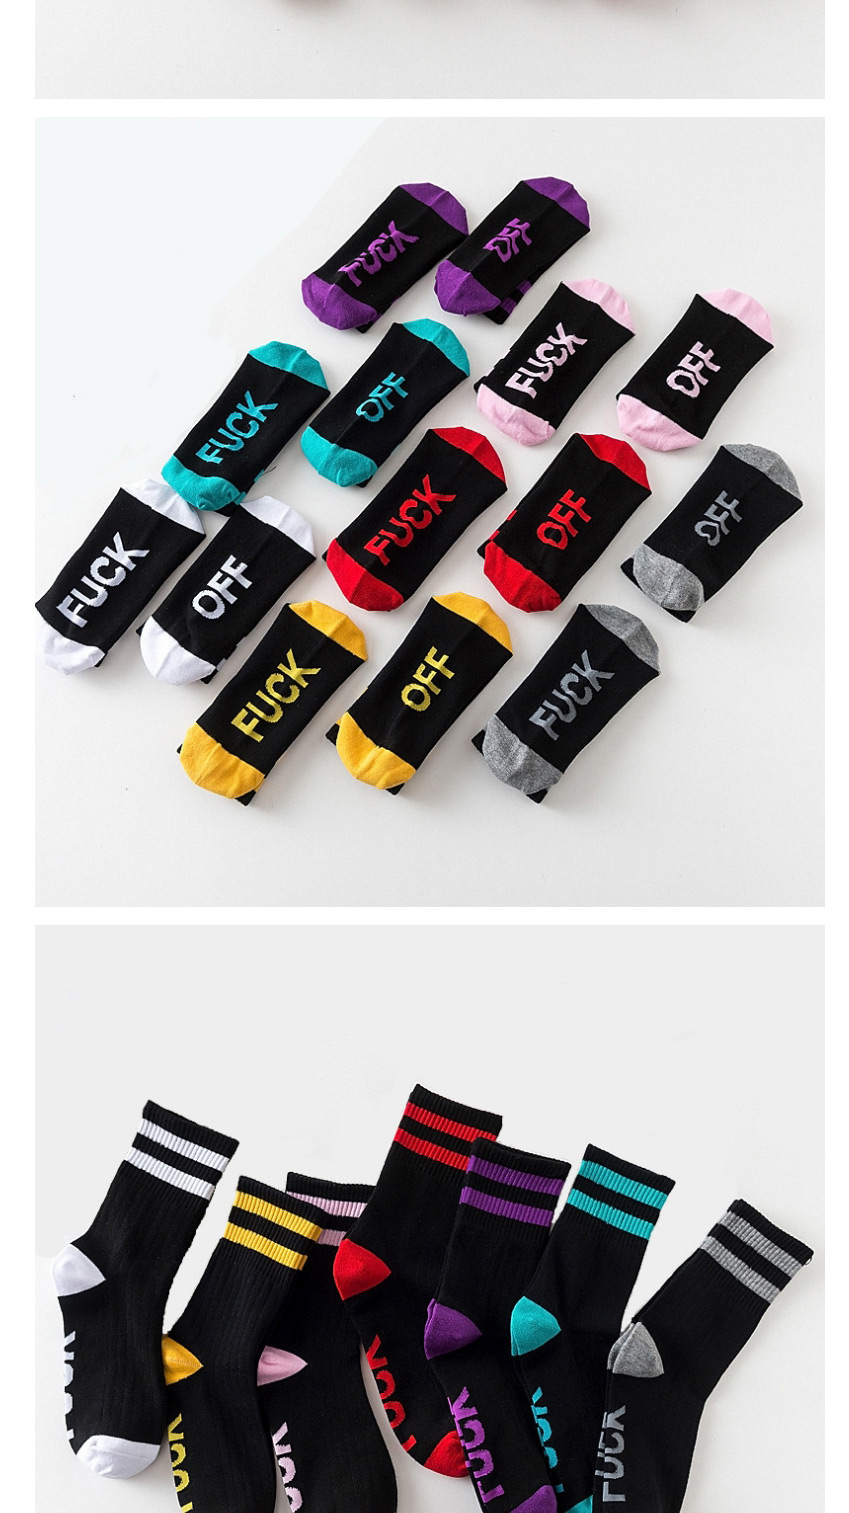 Fashion Black And White Mens Cotton Socks With Contrasting Letters,Fashion Socks